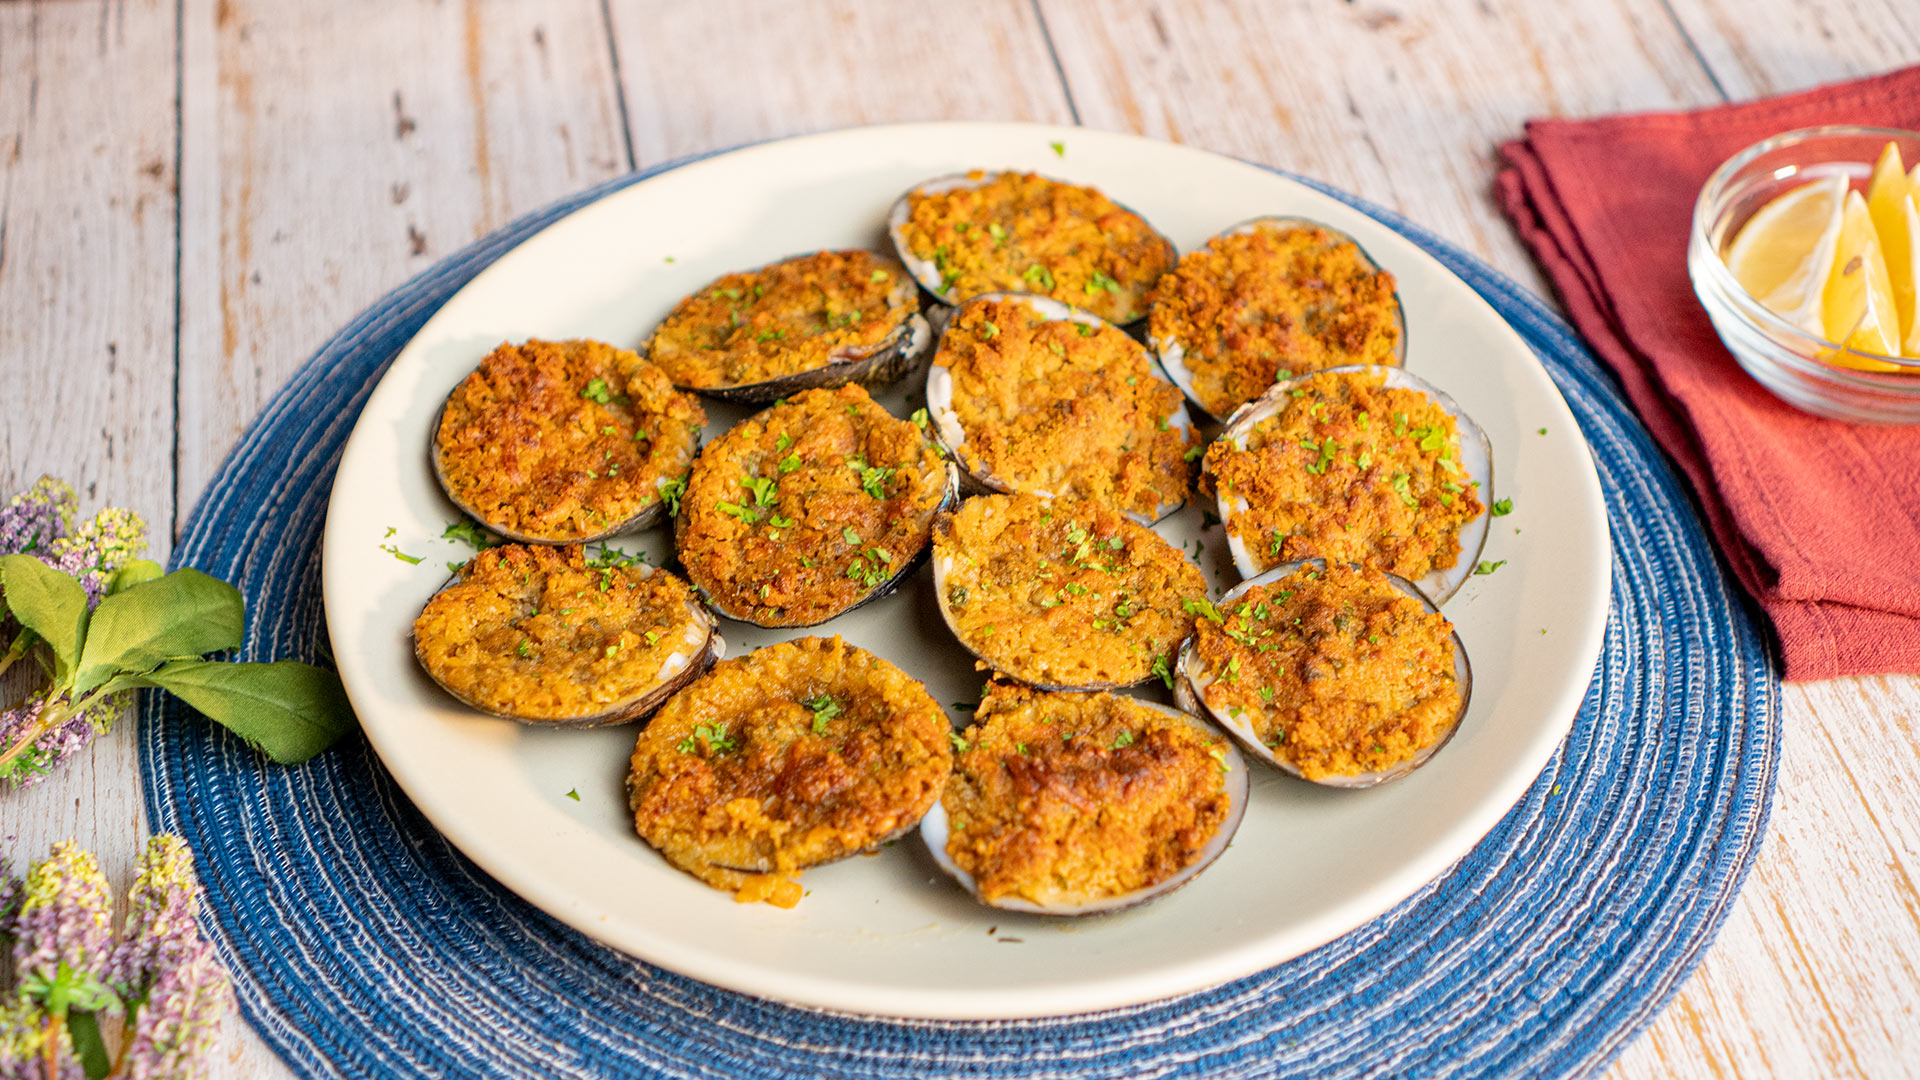 New England Style Baked Stuffed Clams - Cooking With Books